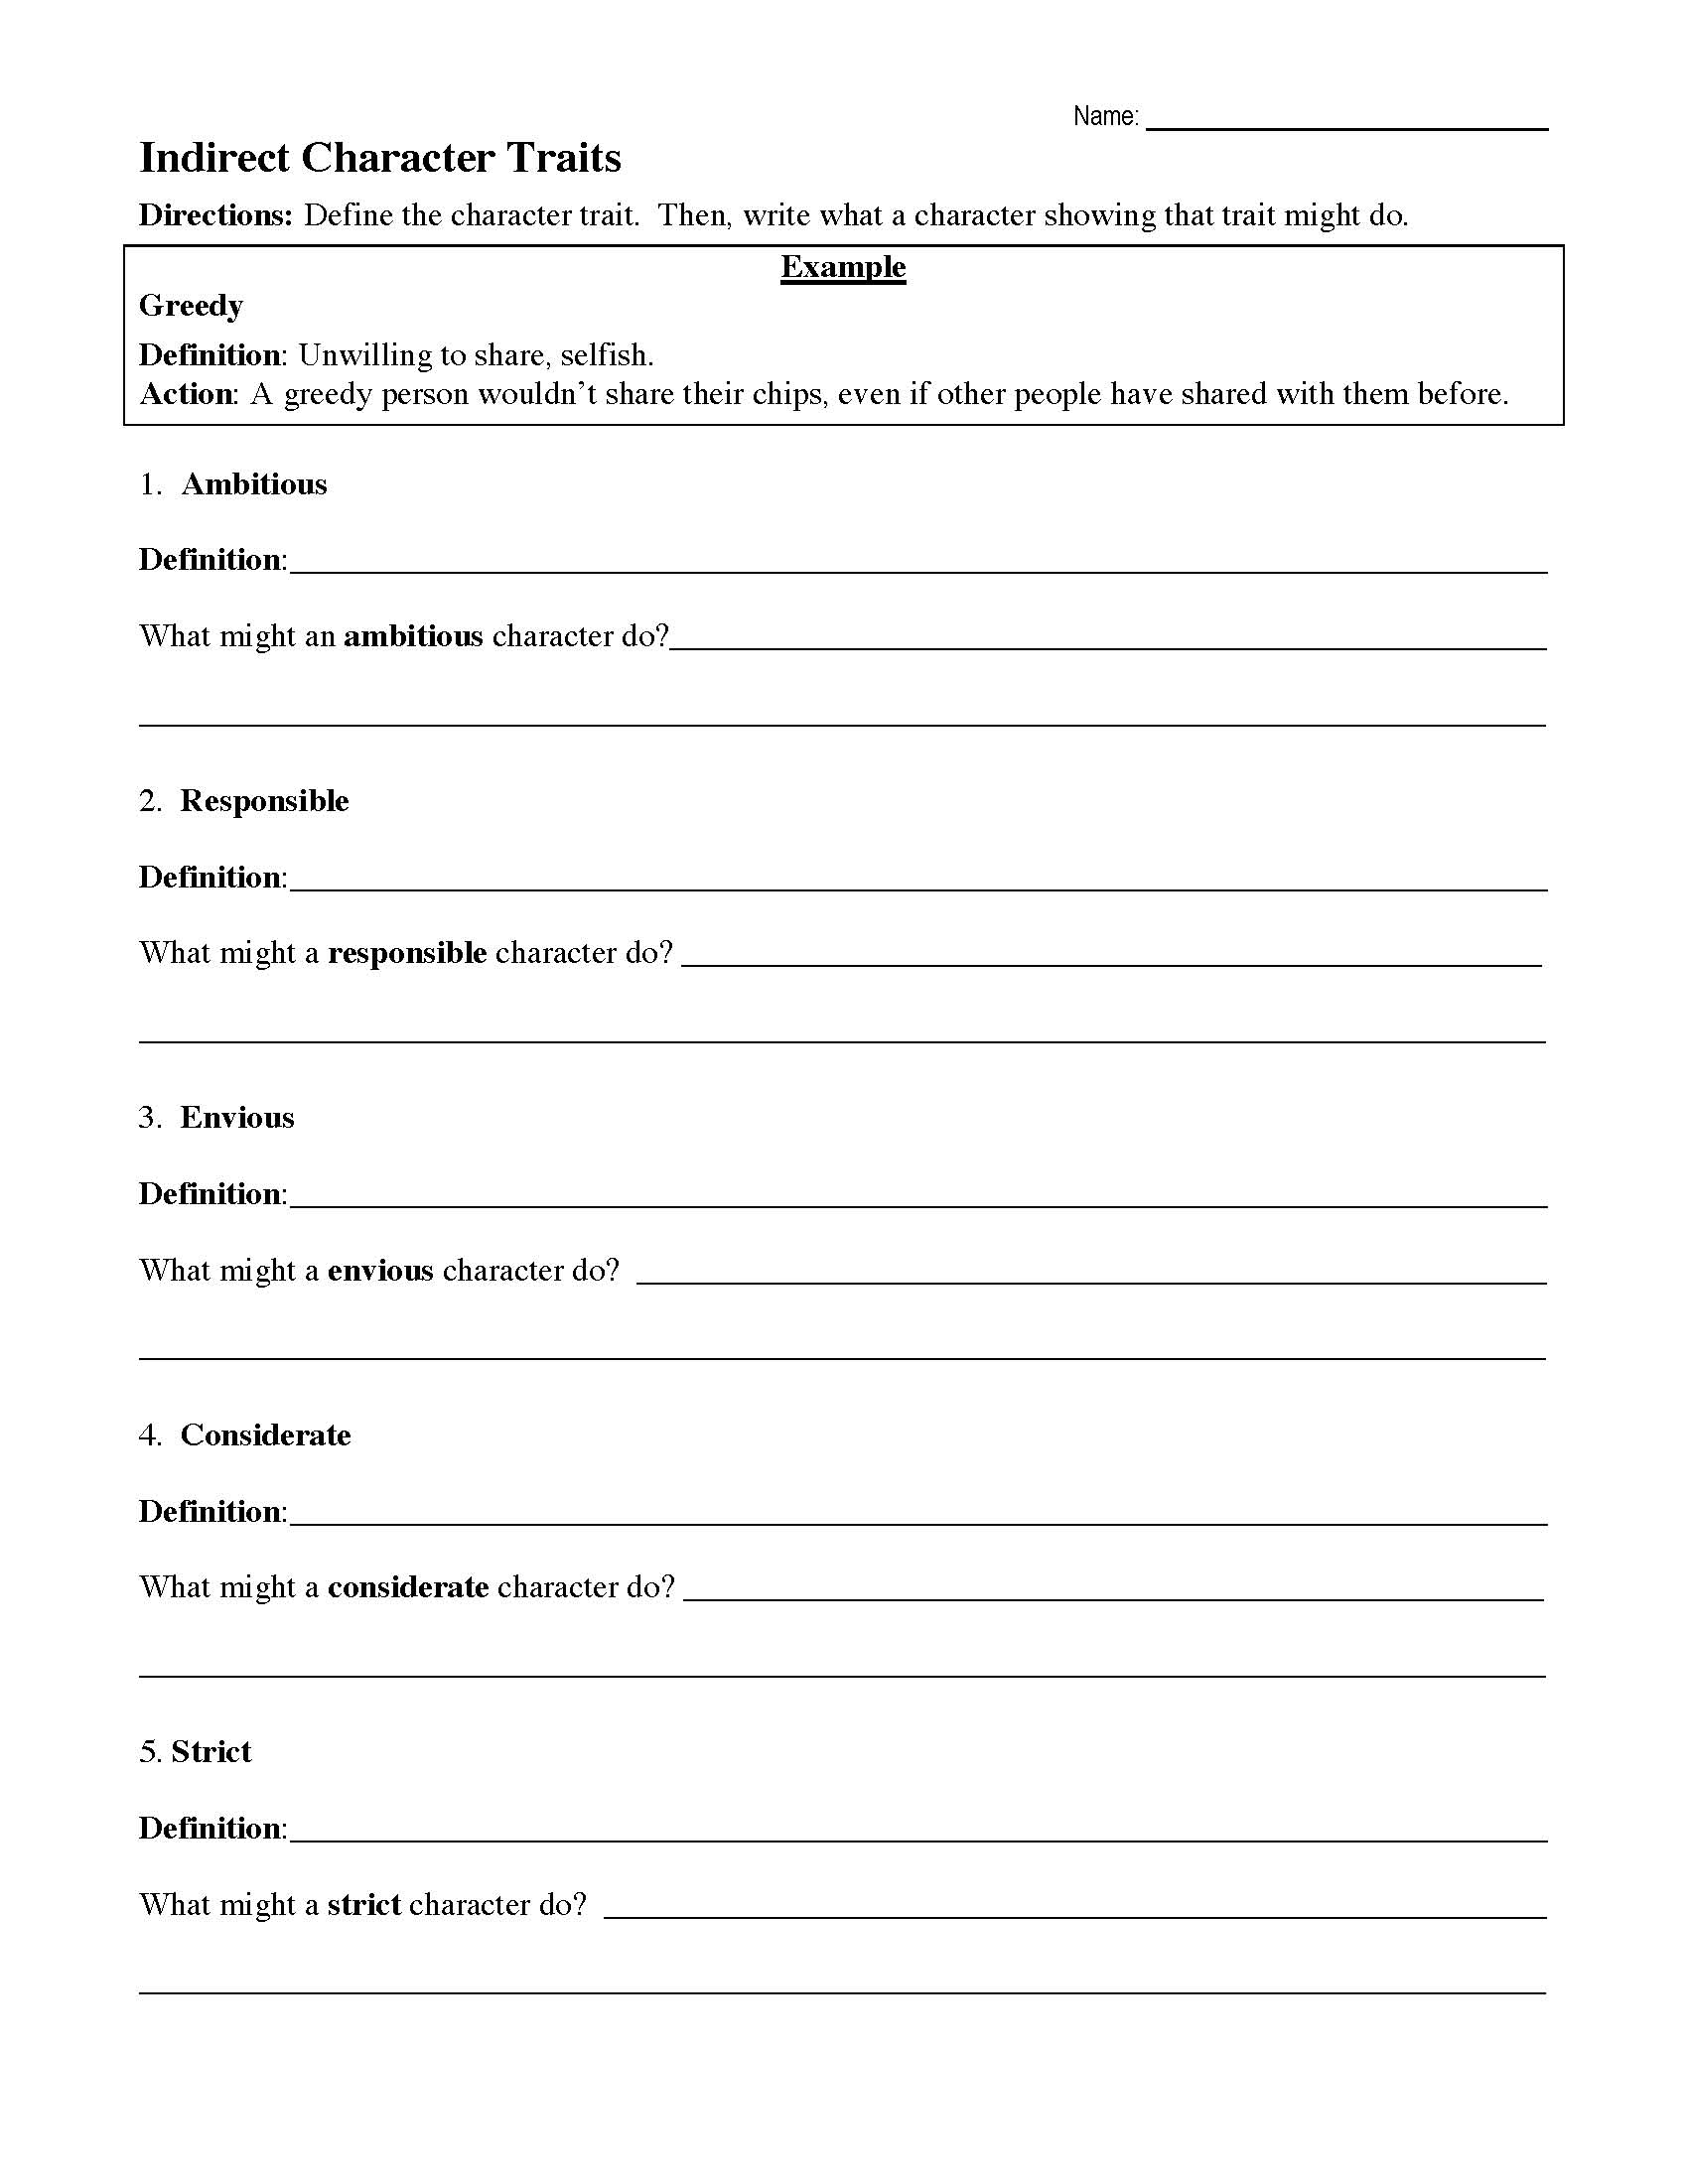 Indirect Characterizations Worksheet  Reading Activity Pertaining To Direct And Indirect Characterization Worksheet